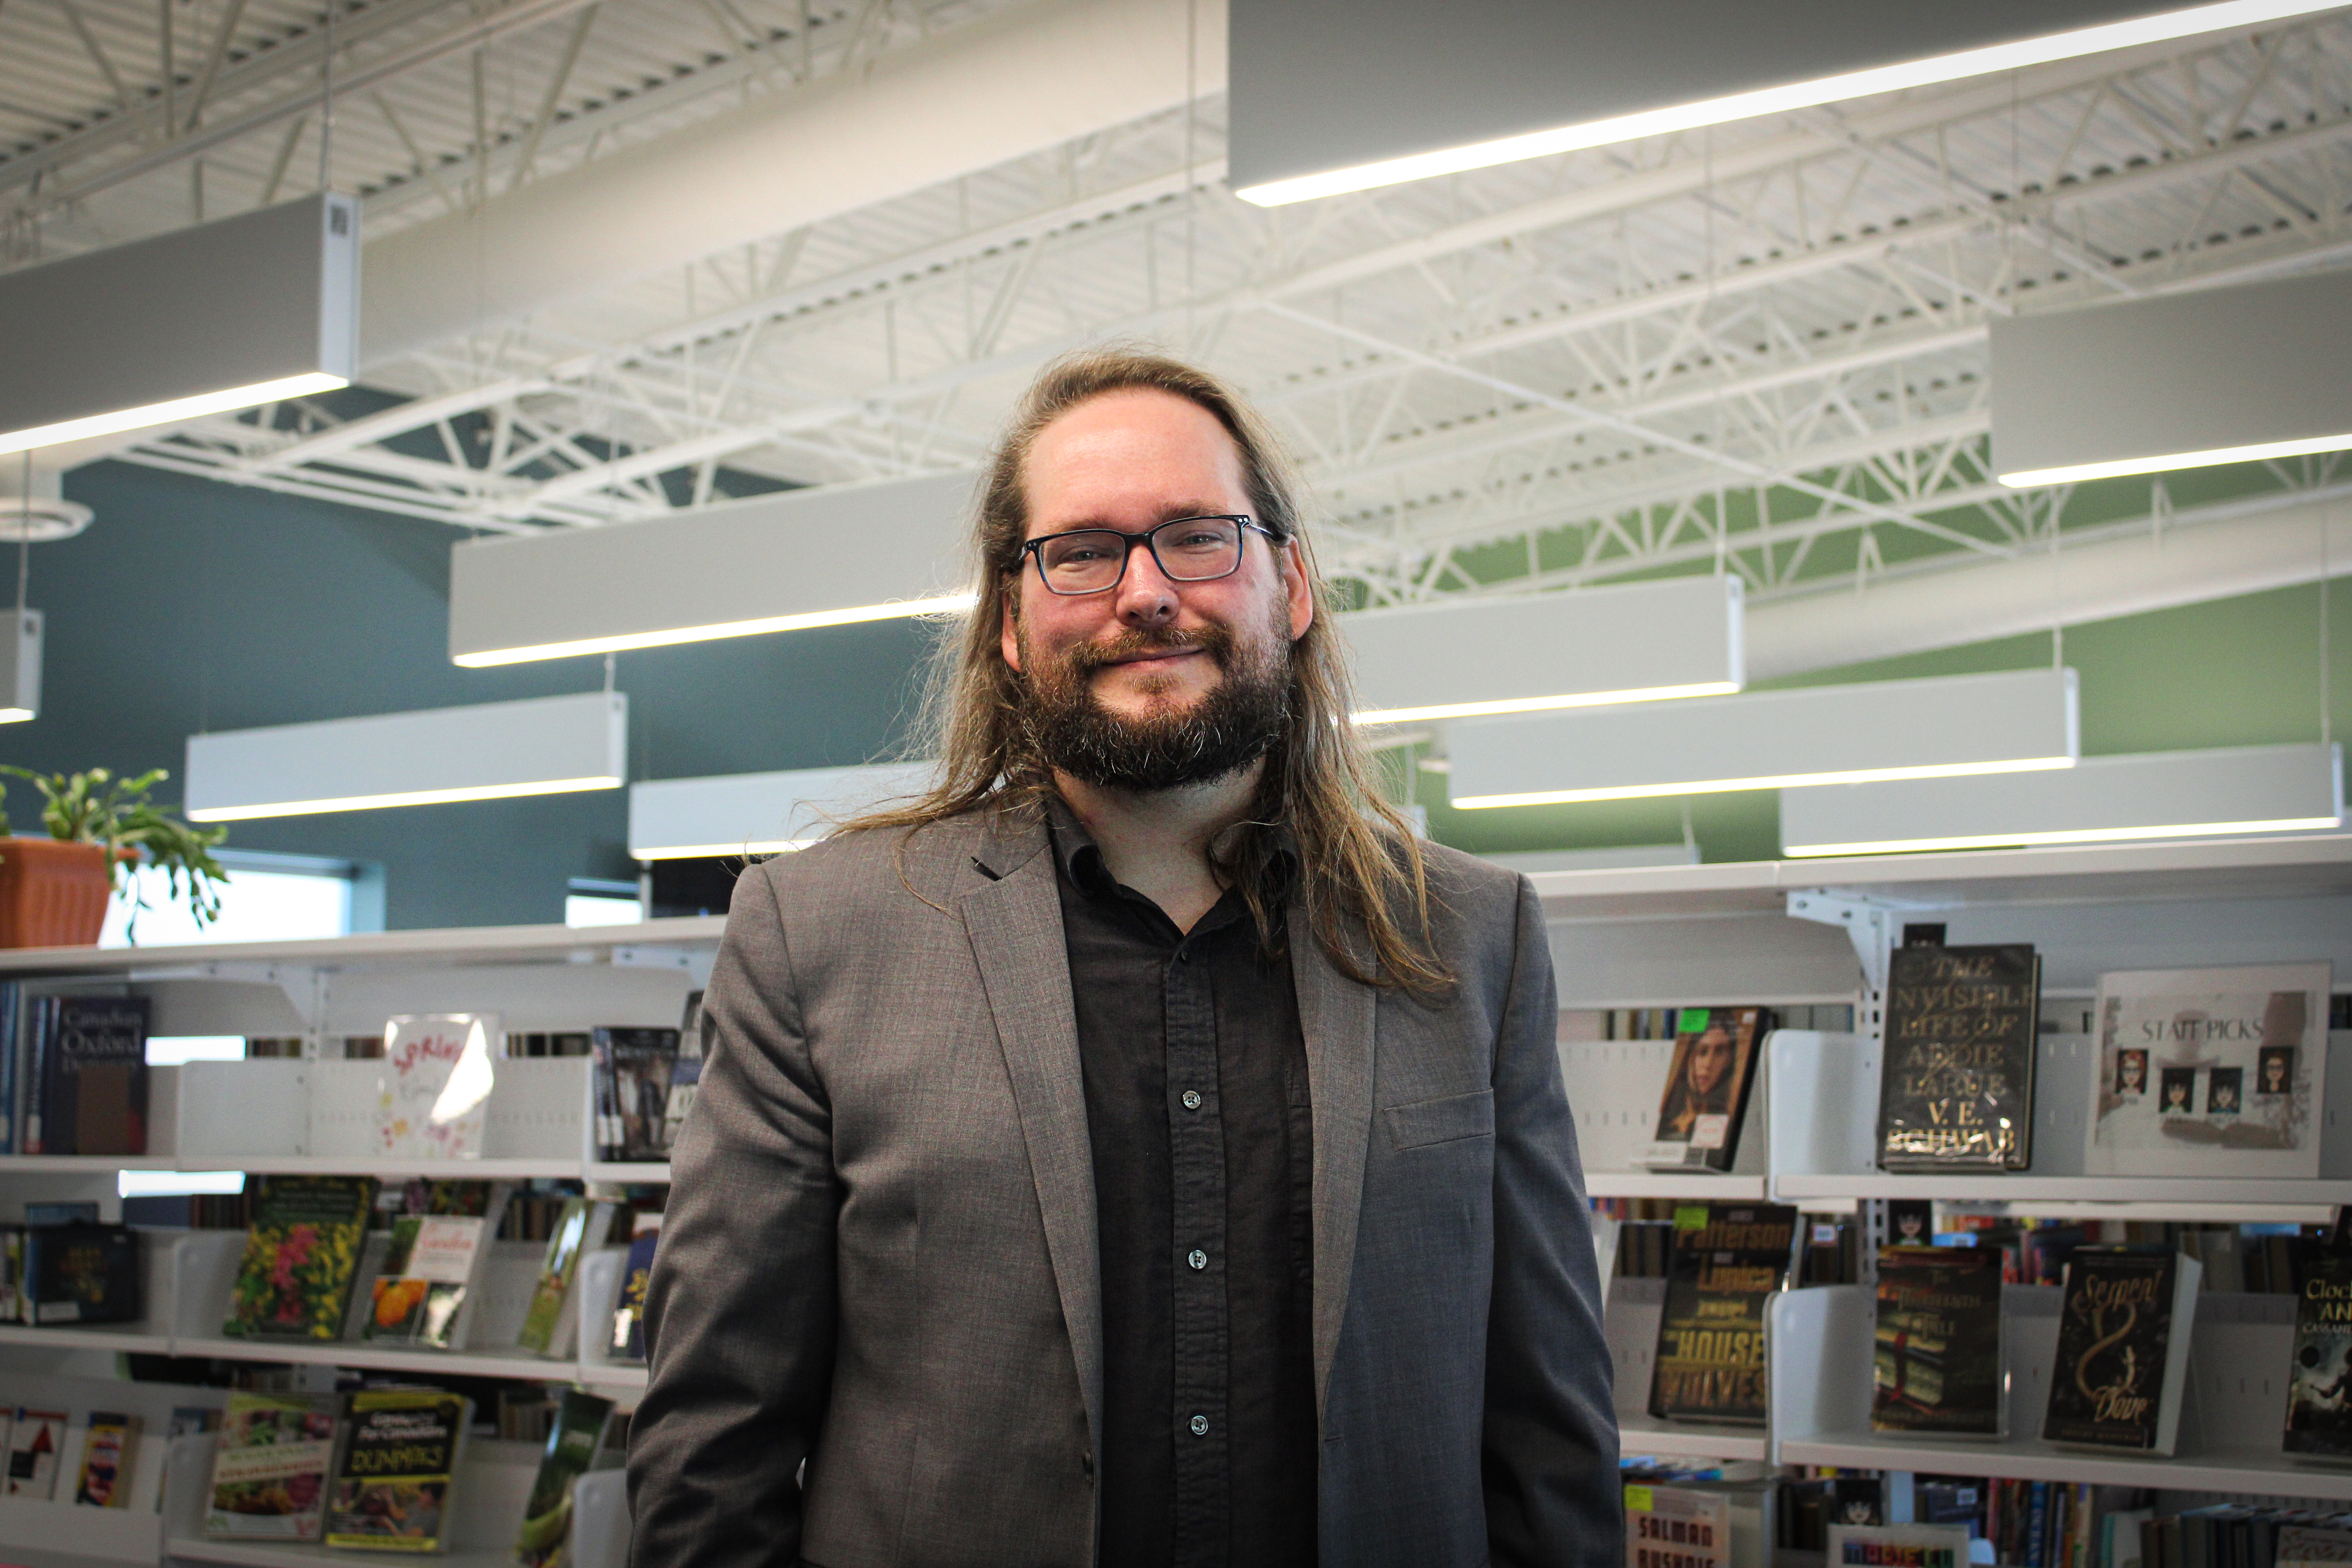 Andrew Lockhart, in black shirt and grey suit stands in front of CBS library shelves. He has shelves with books in the background and ceiling lights to his top.